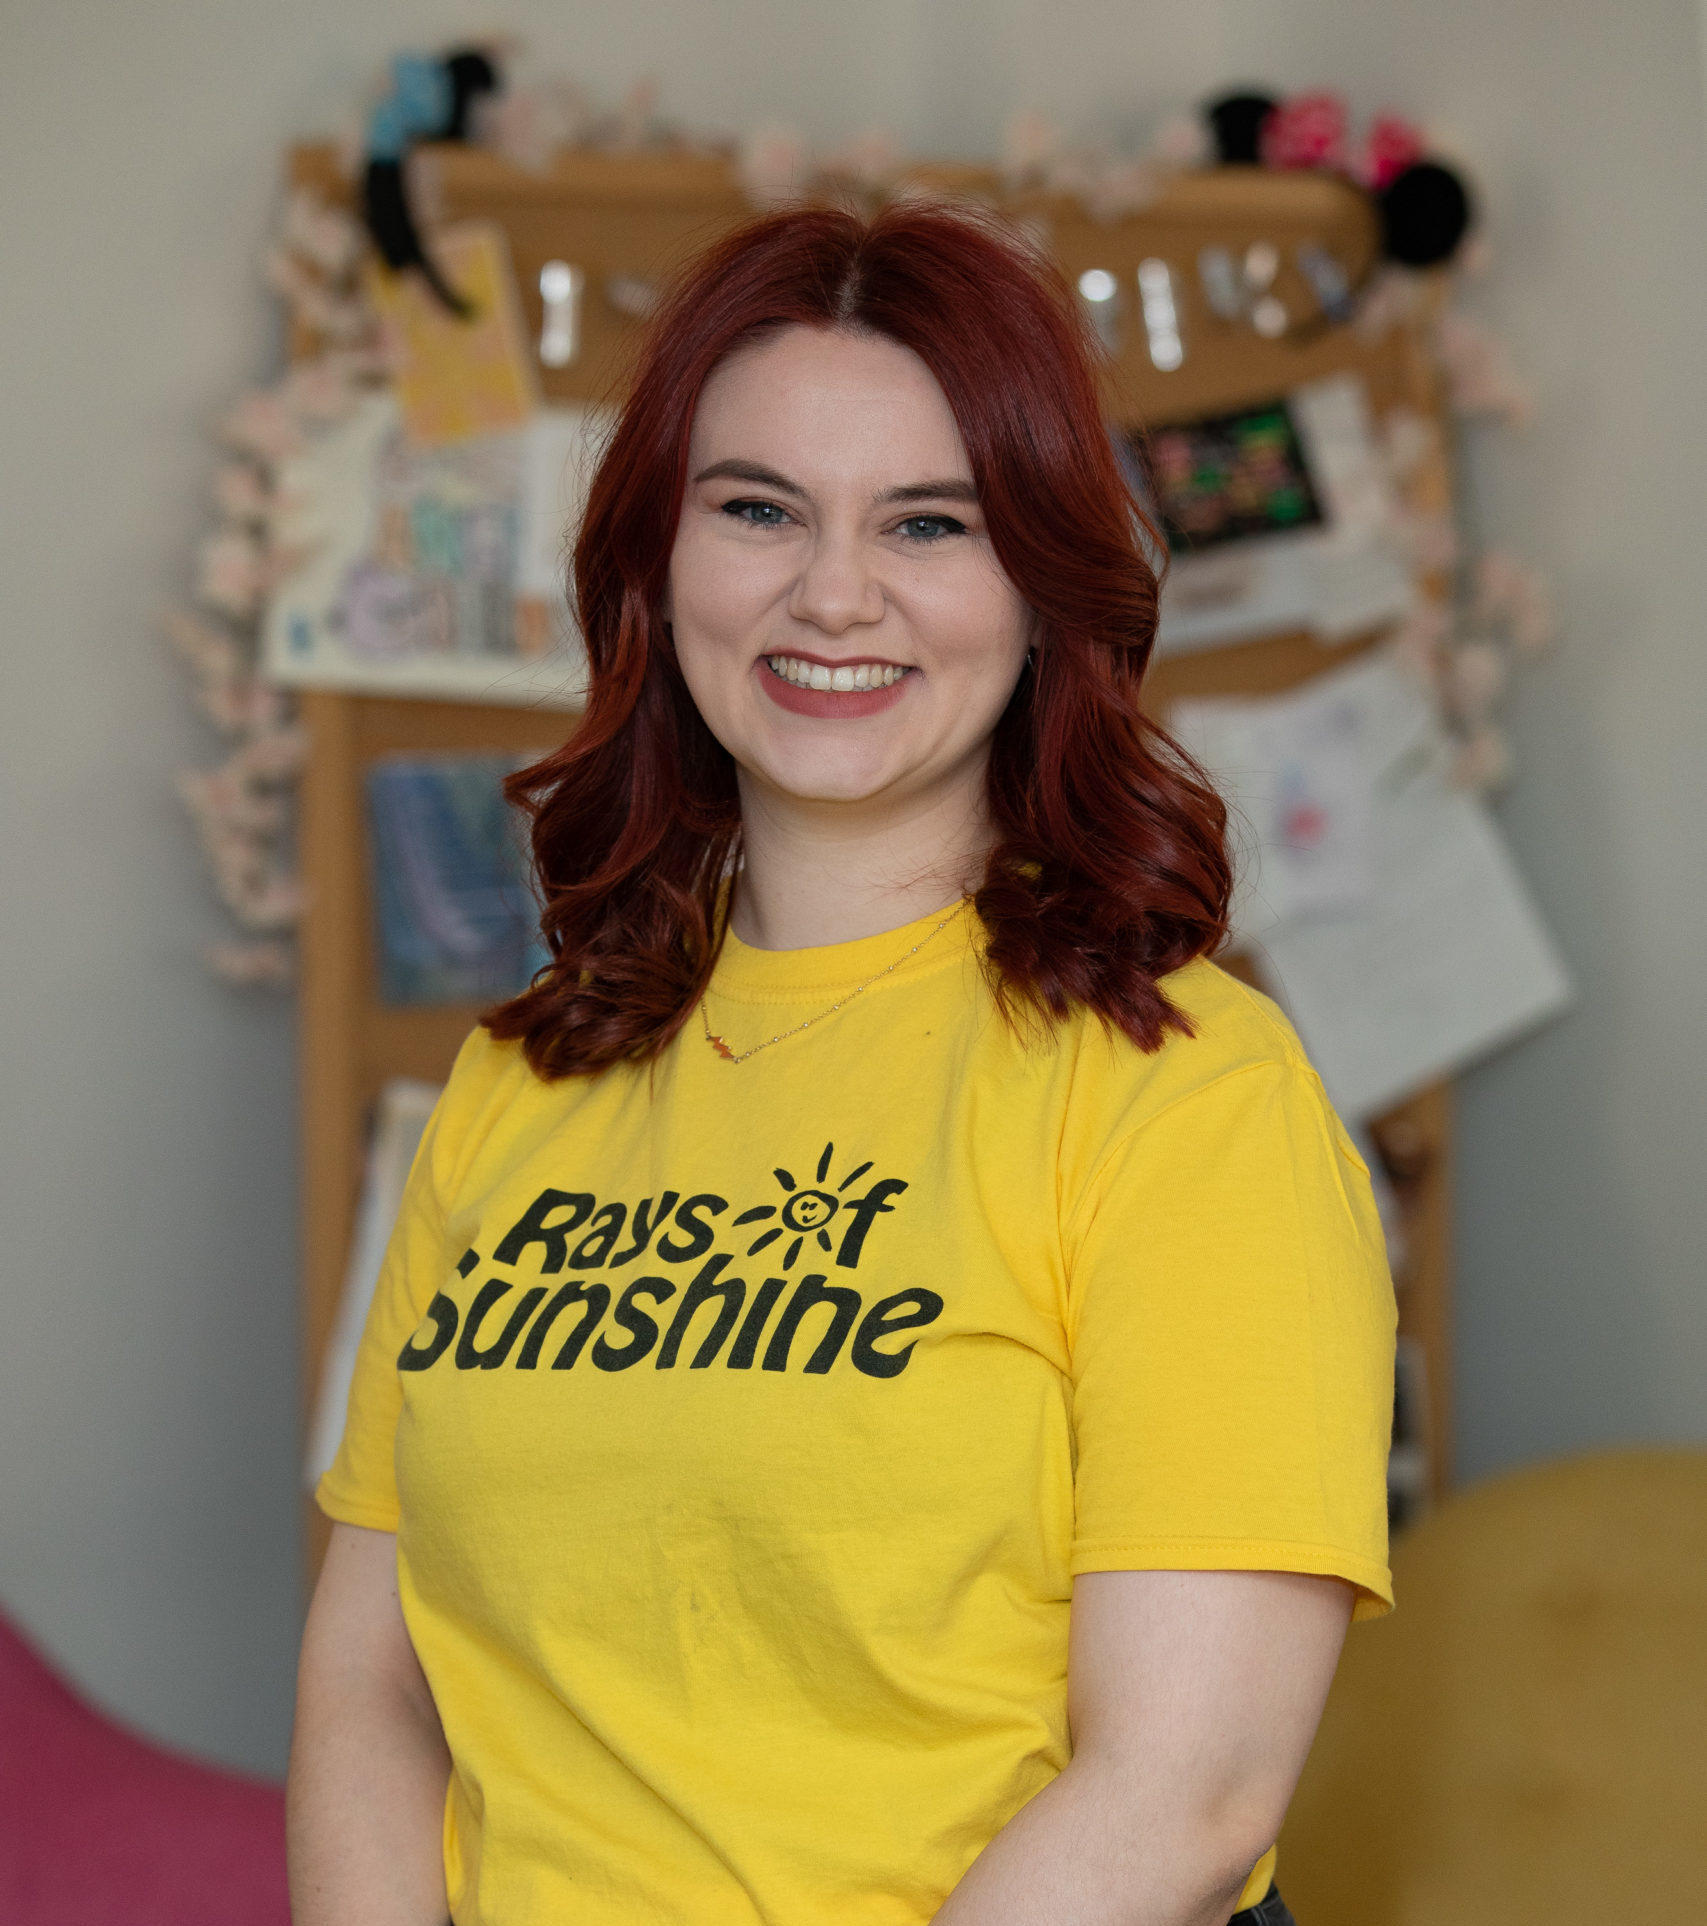 Kathryn is wearing a yellow Rays of Sunshine t-shirt. Kathryn is standing and has red hair,